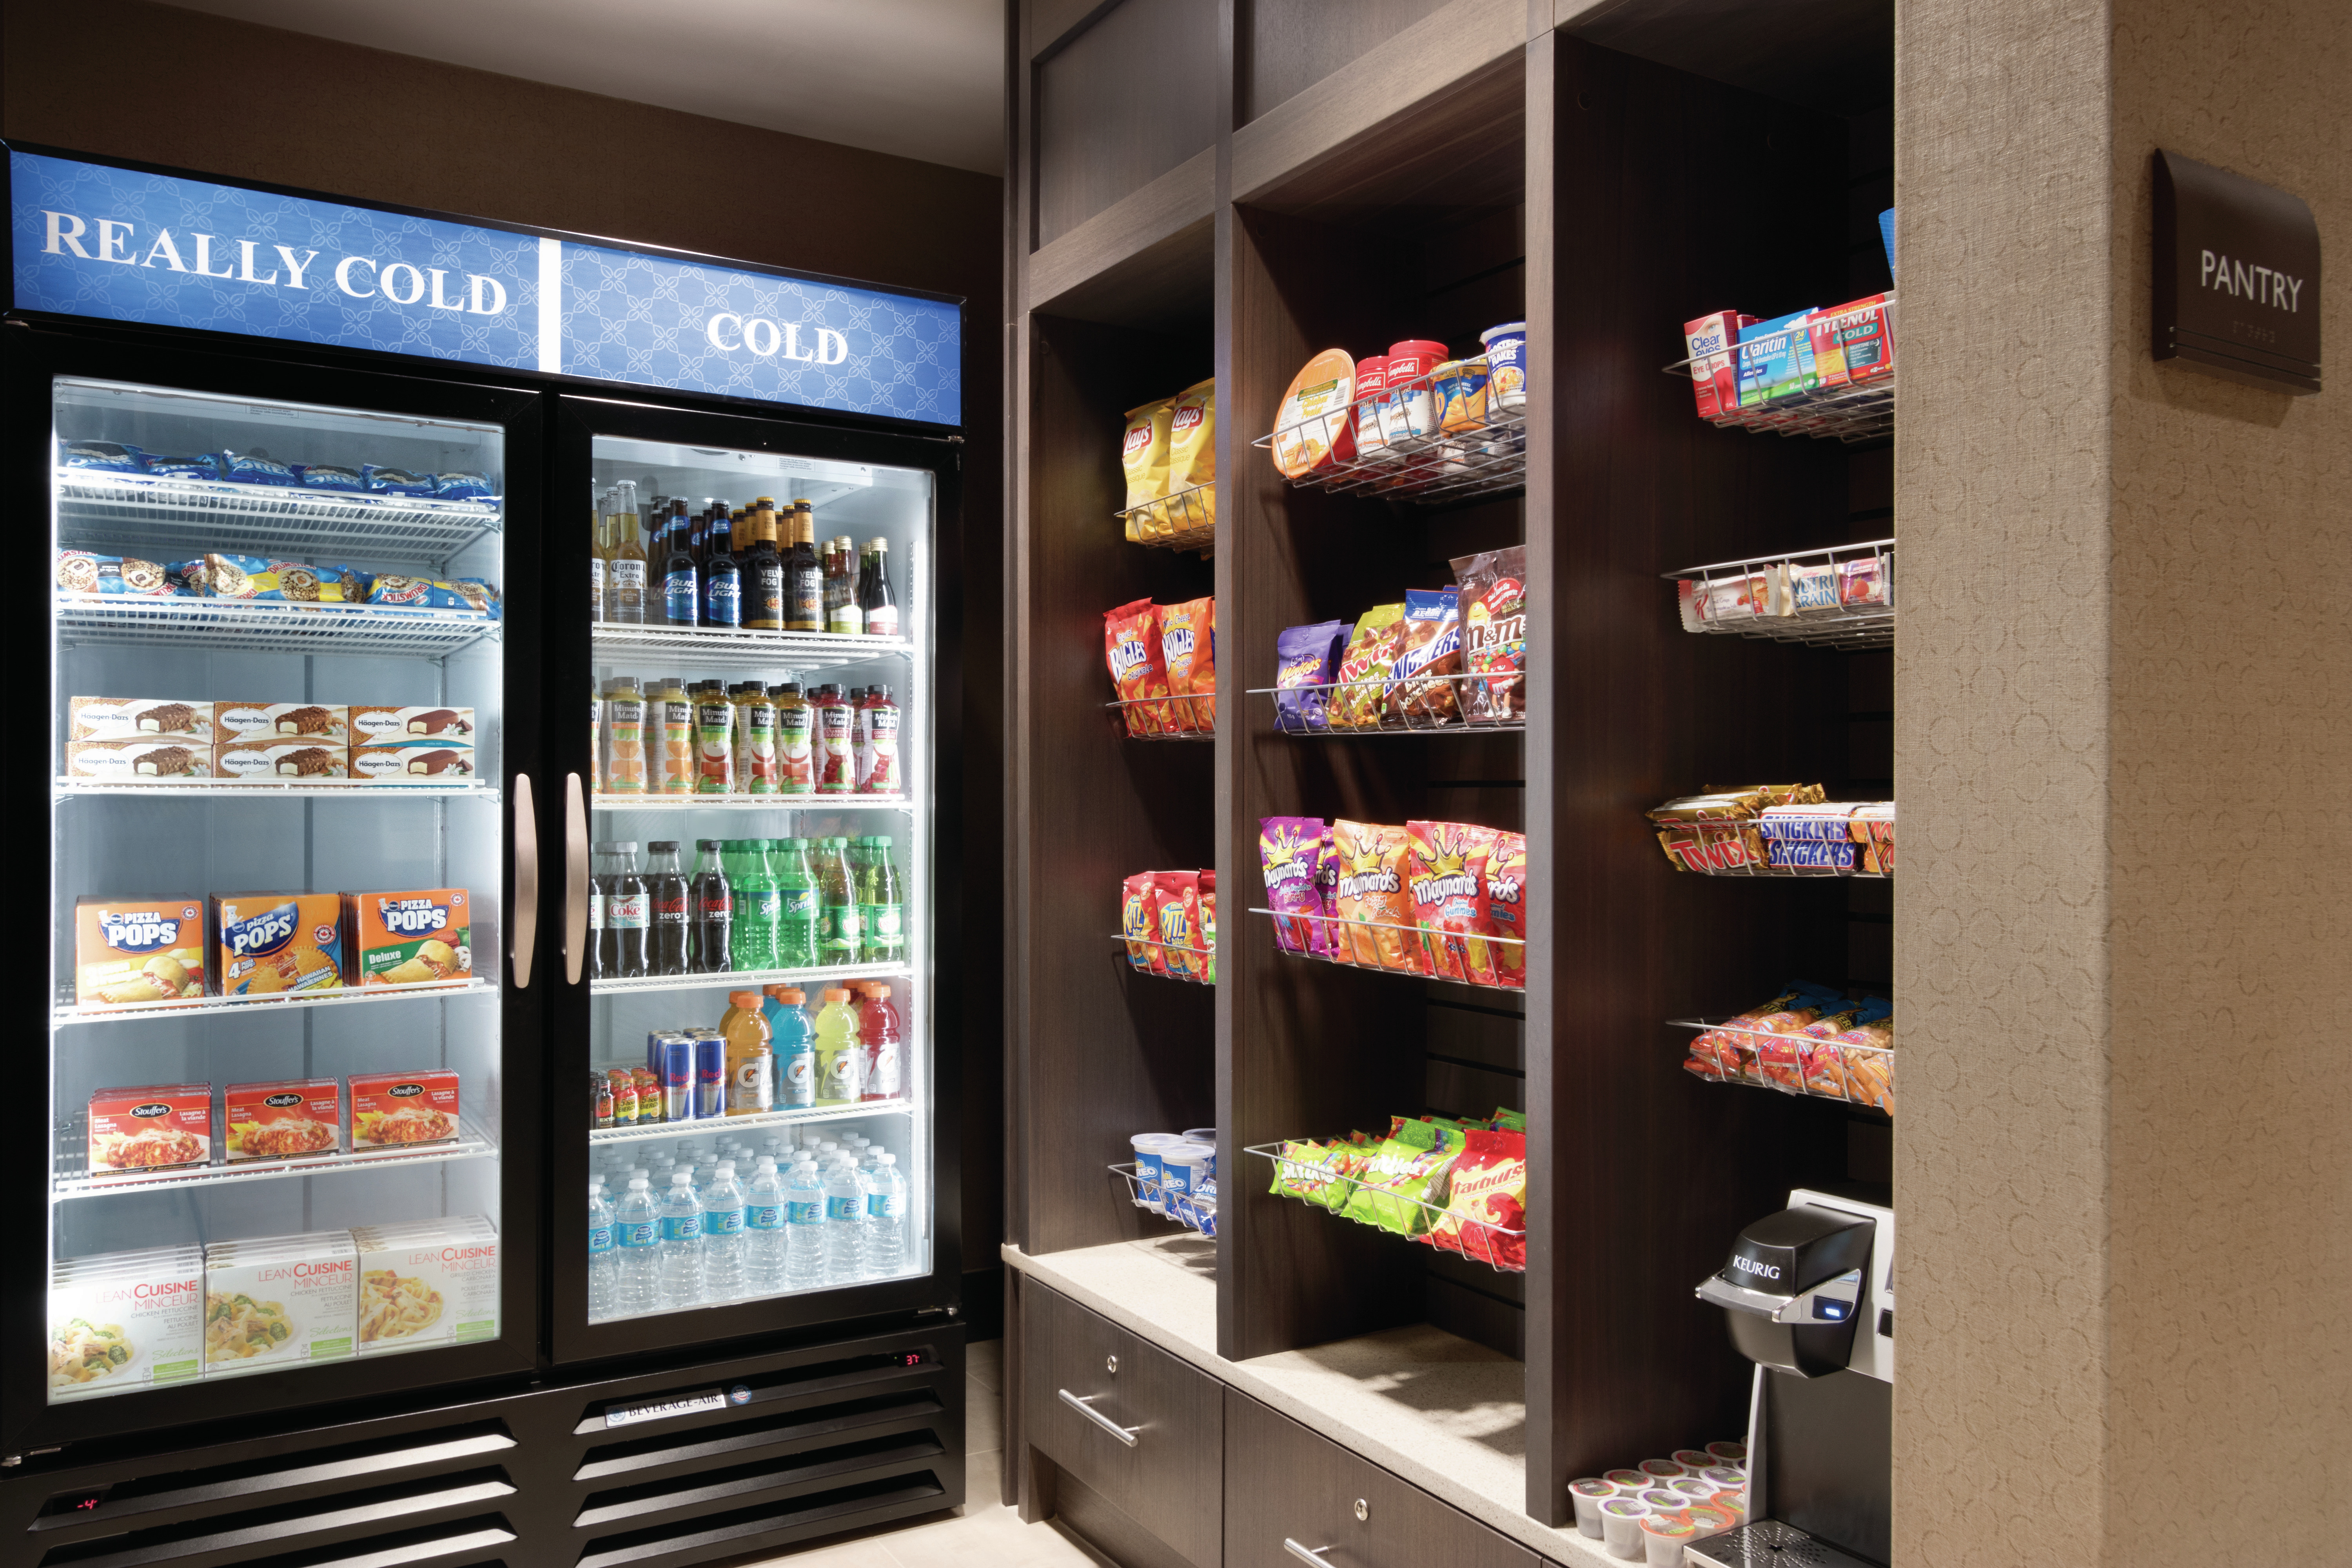 Snack Shop with Food and Cold Beverage Options 